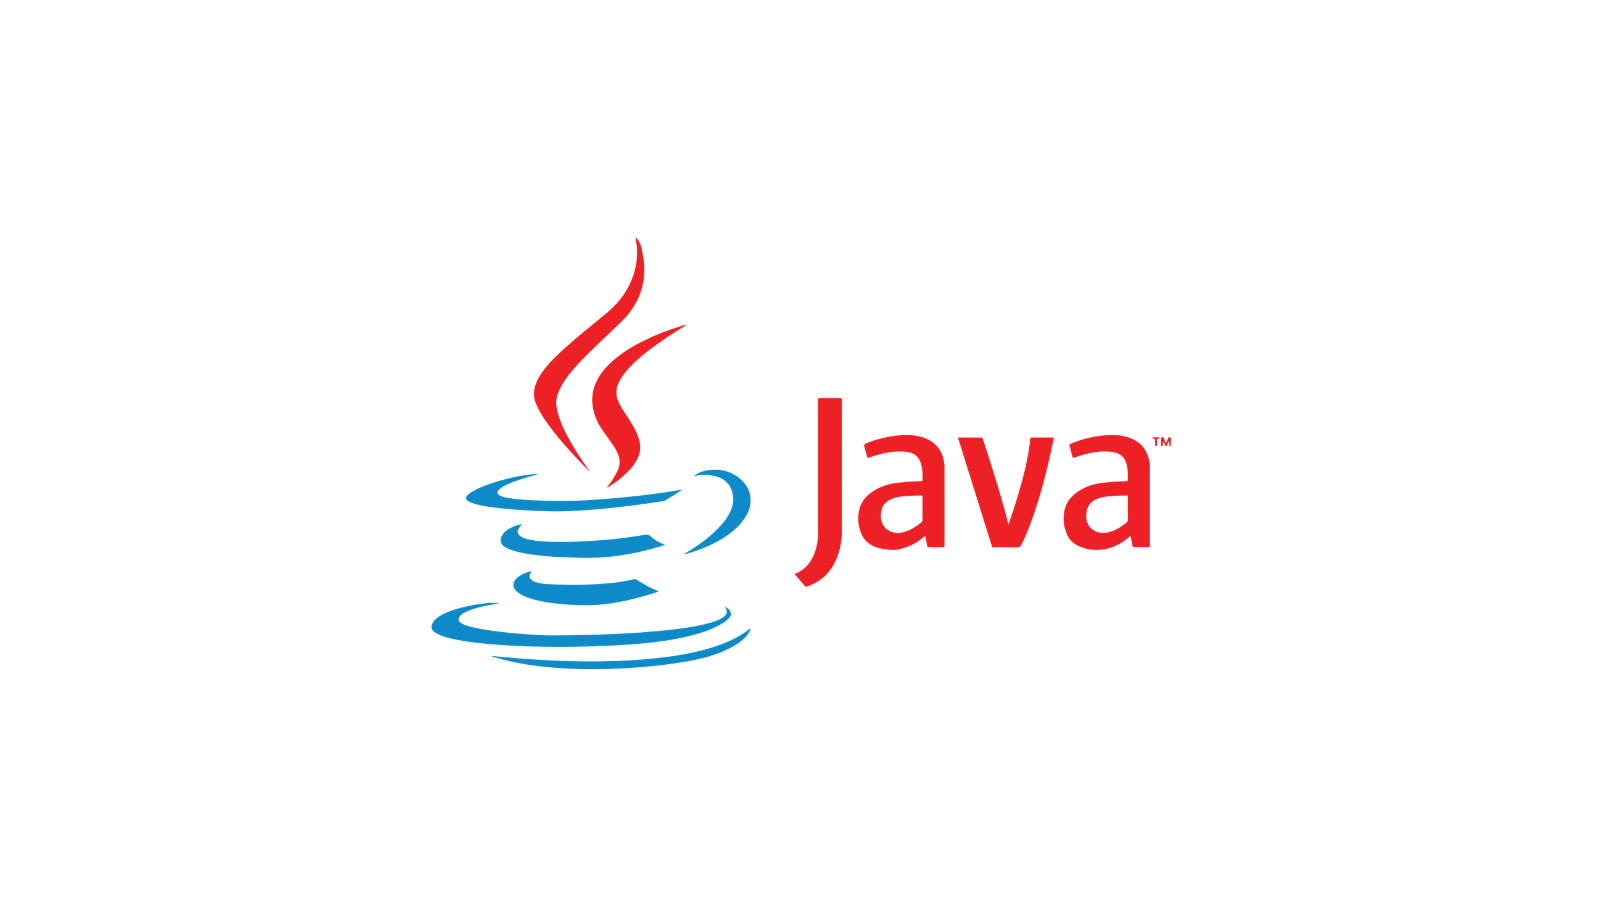 java download for windows 10 latest version